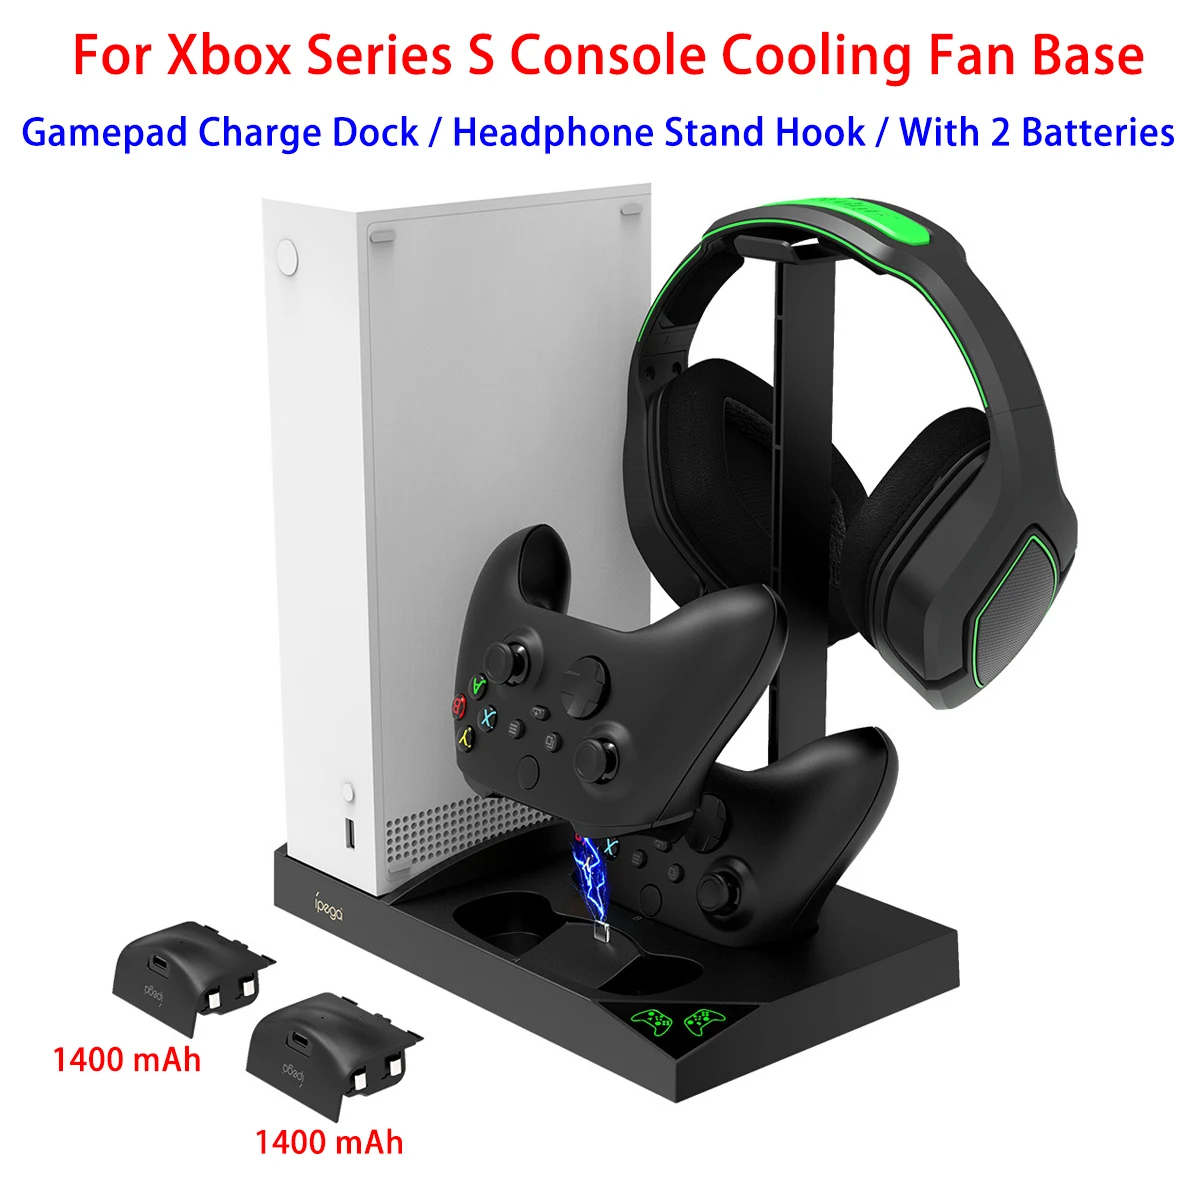 4 In 1 Vertical Stand For Xbox Series S Console Cooling Fan Base Dual Controller Charging Dock With Headphone Stand Hook for XSS